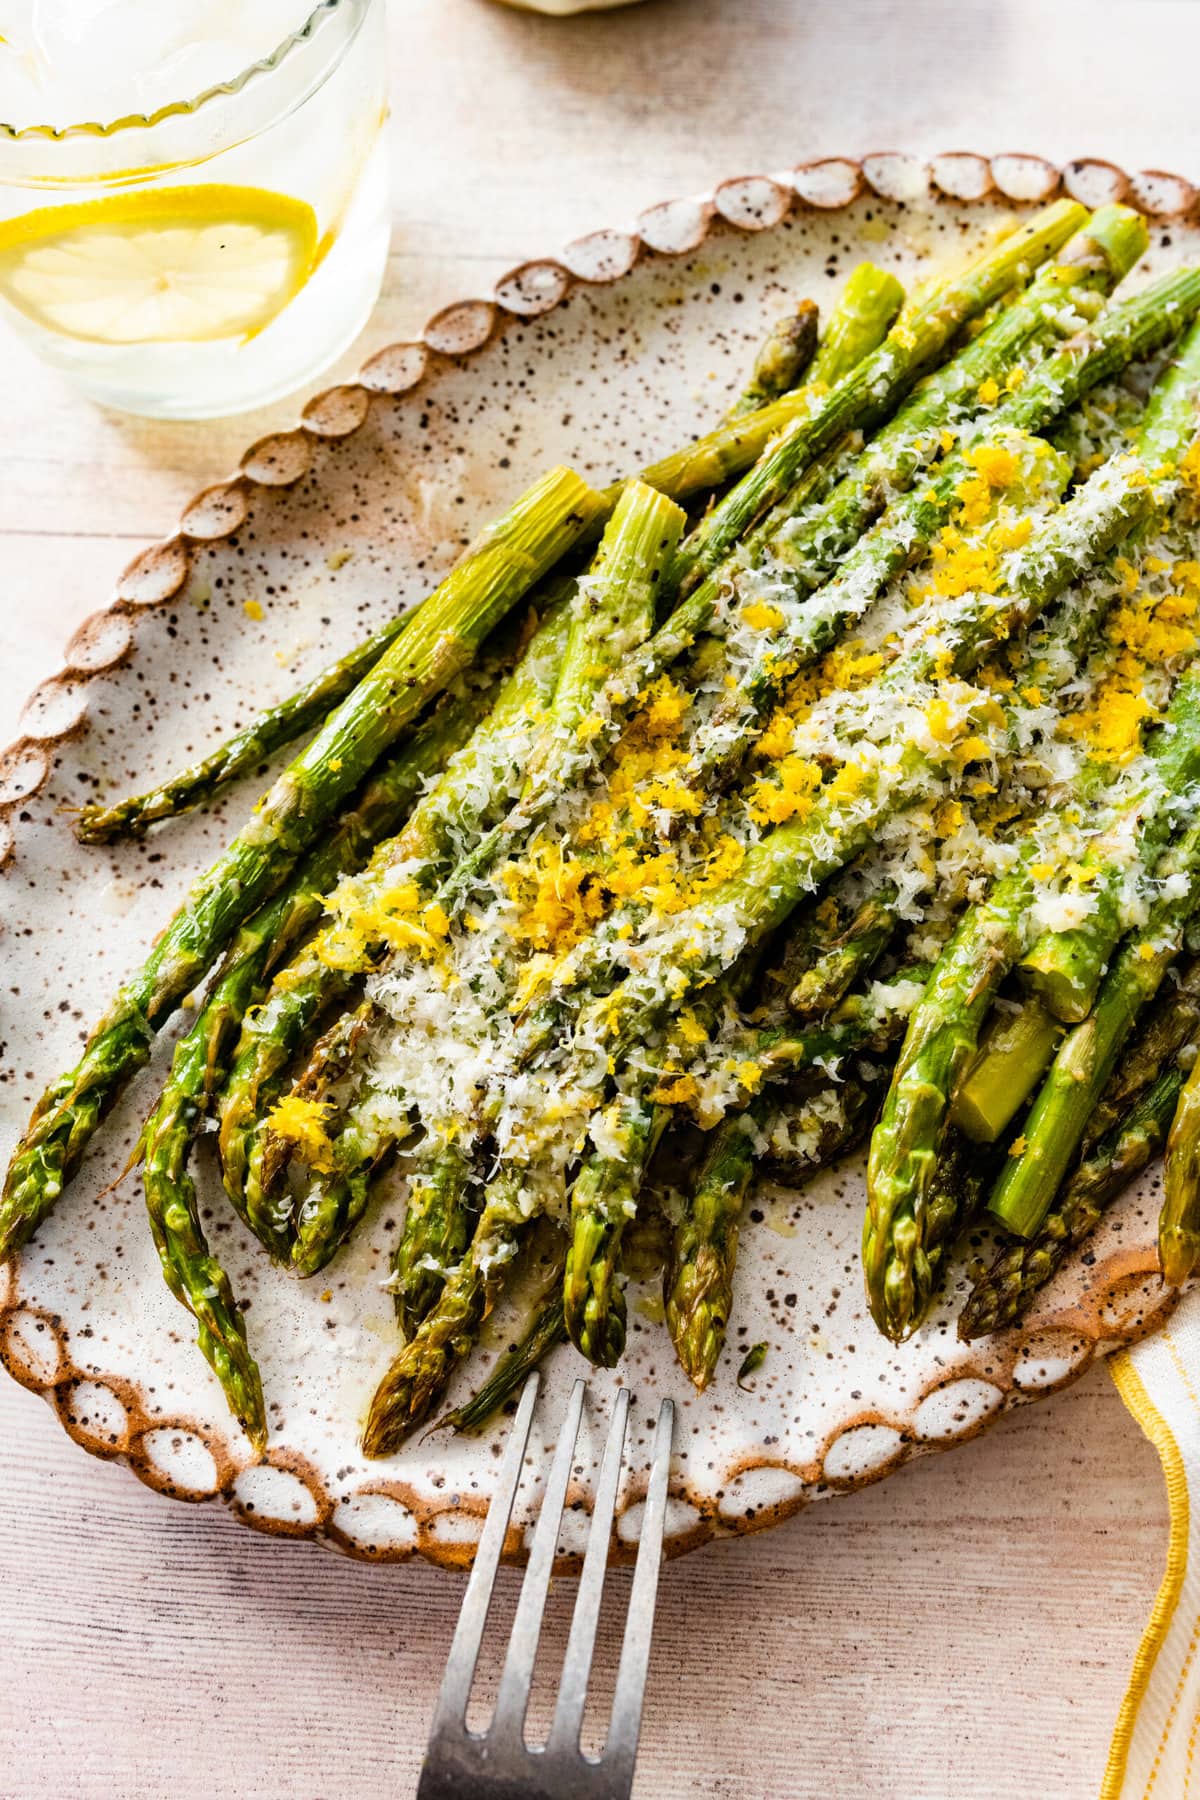 asparagus finished cooking on a white platter with freshly grated parmigiano and lemon on it. Fork on plate.